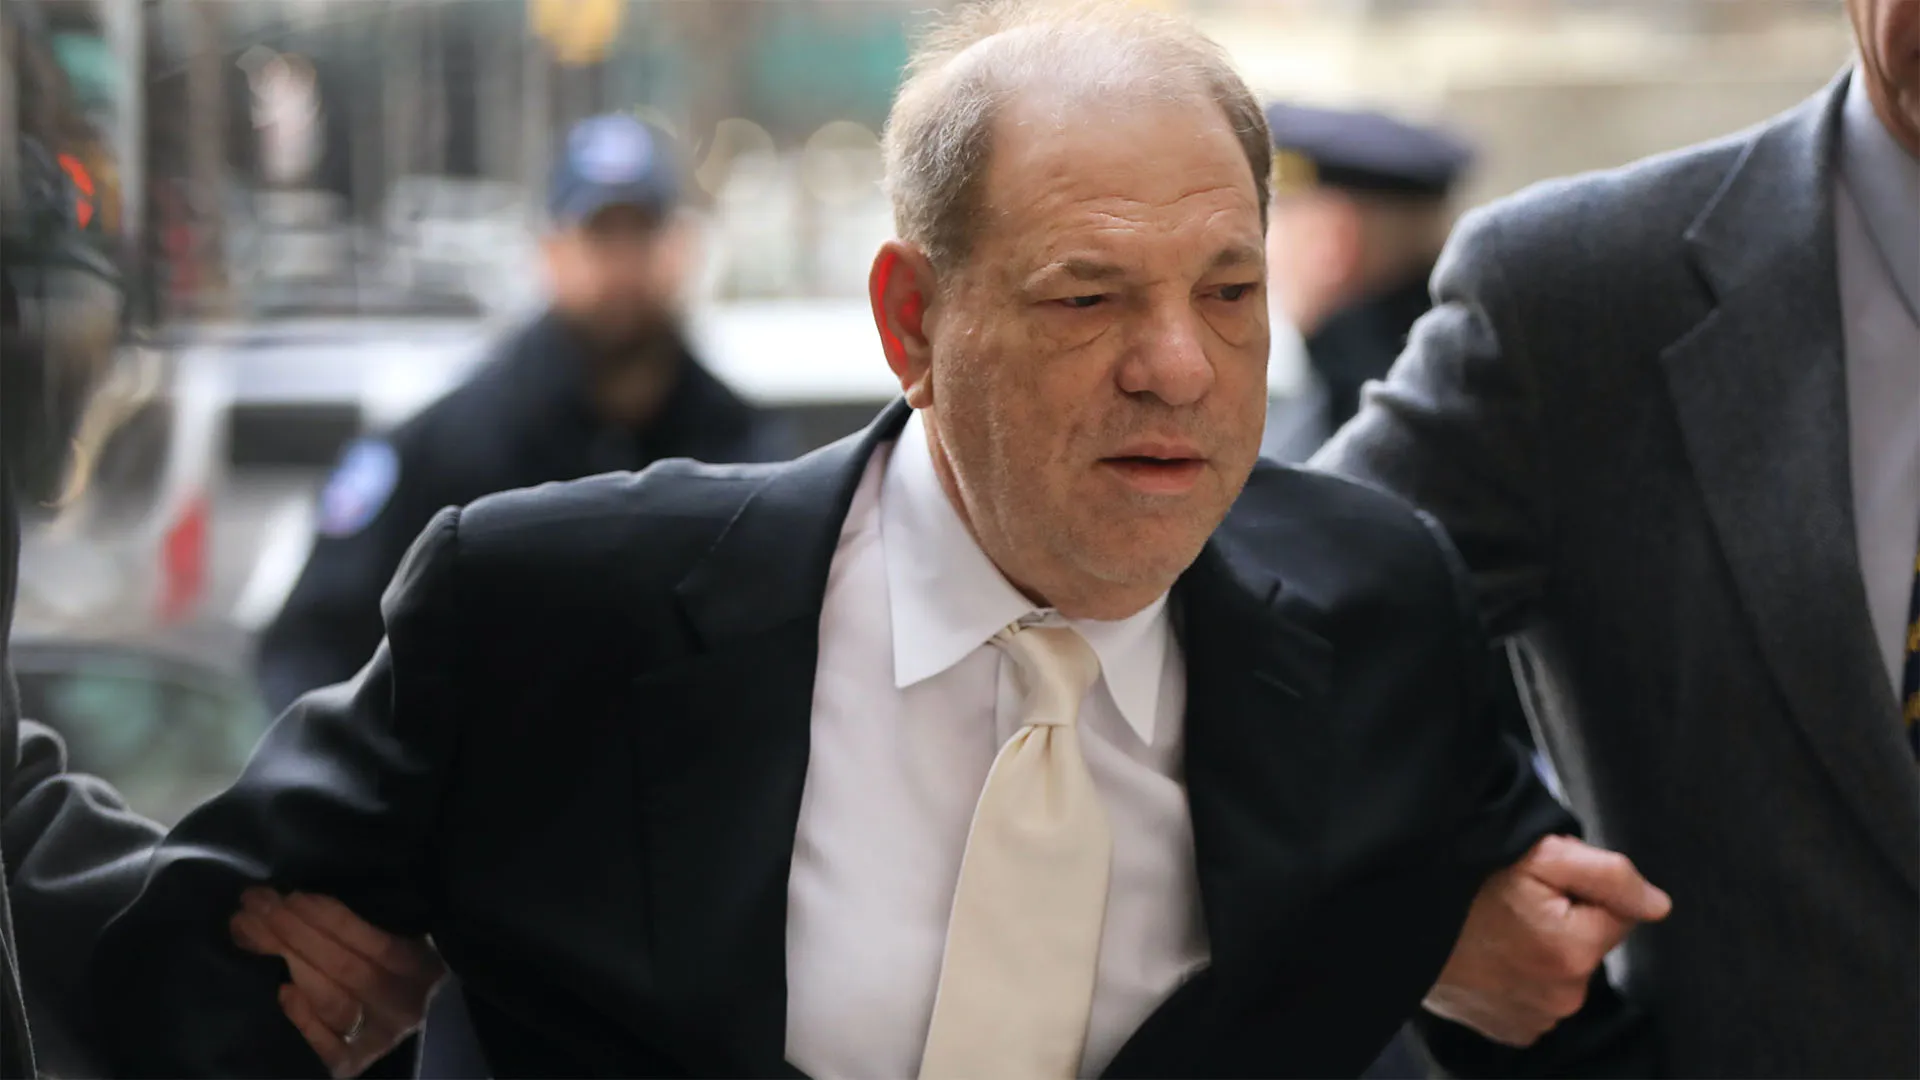 Weinstein Hospitalized for Testing After Return to New York Jail